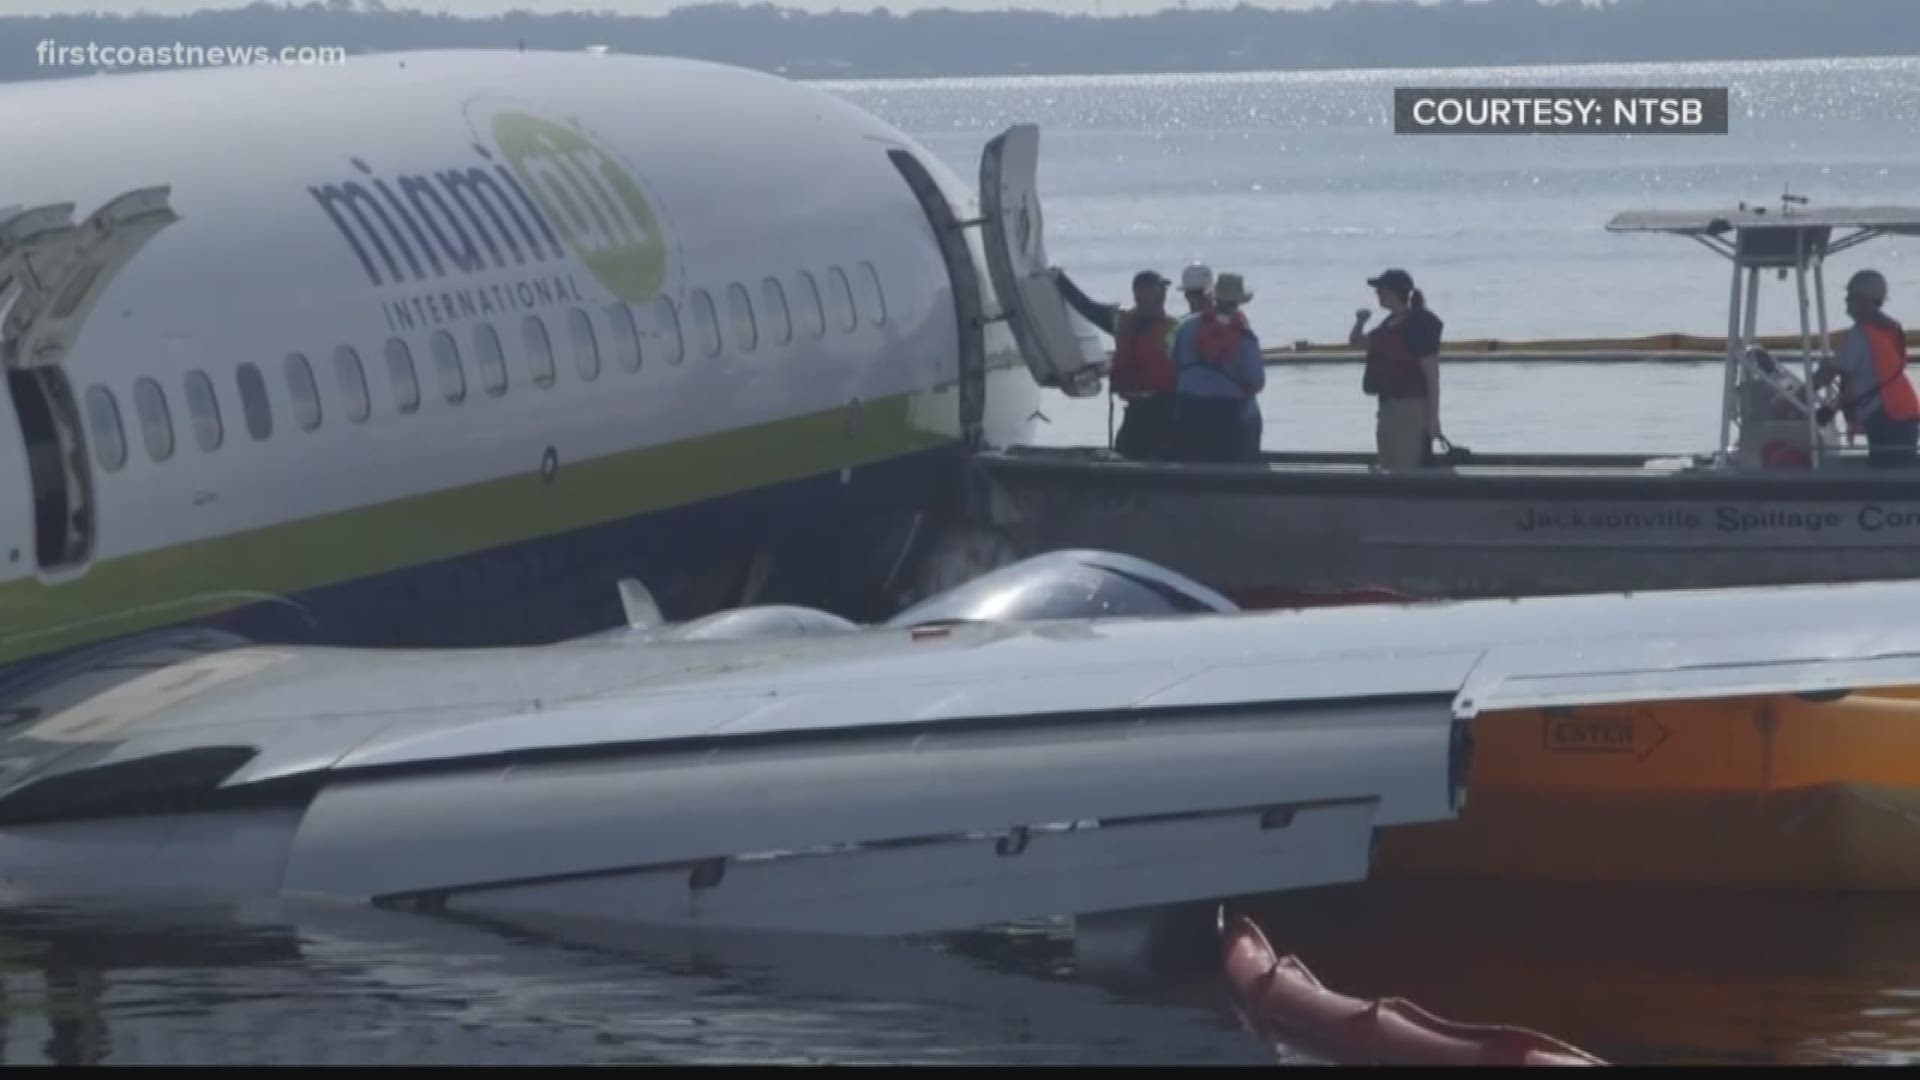 The suit was filed by a passenger who was injured. In it, he claims the plane was flying too high and moving too fast when it came in for a landing at NAS Jacksonville before sliding into the St. Johns River.